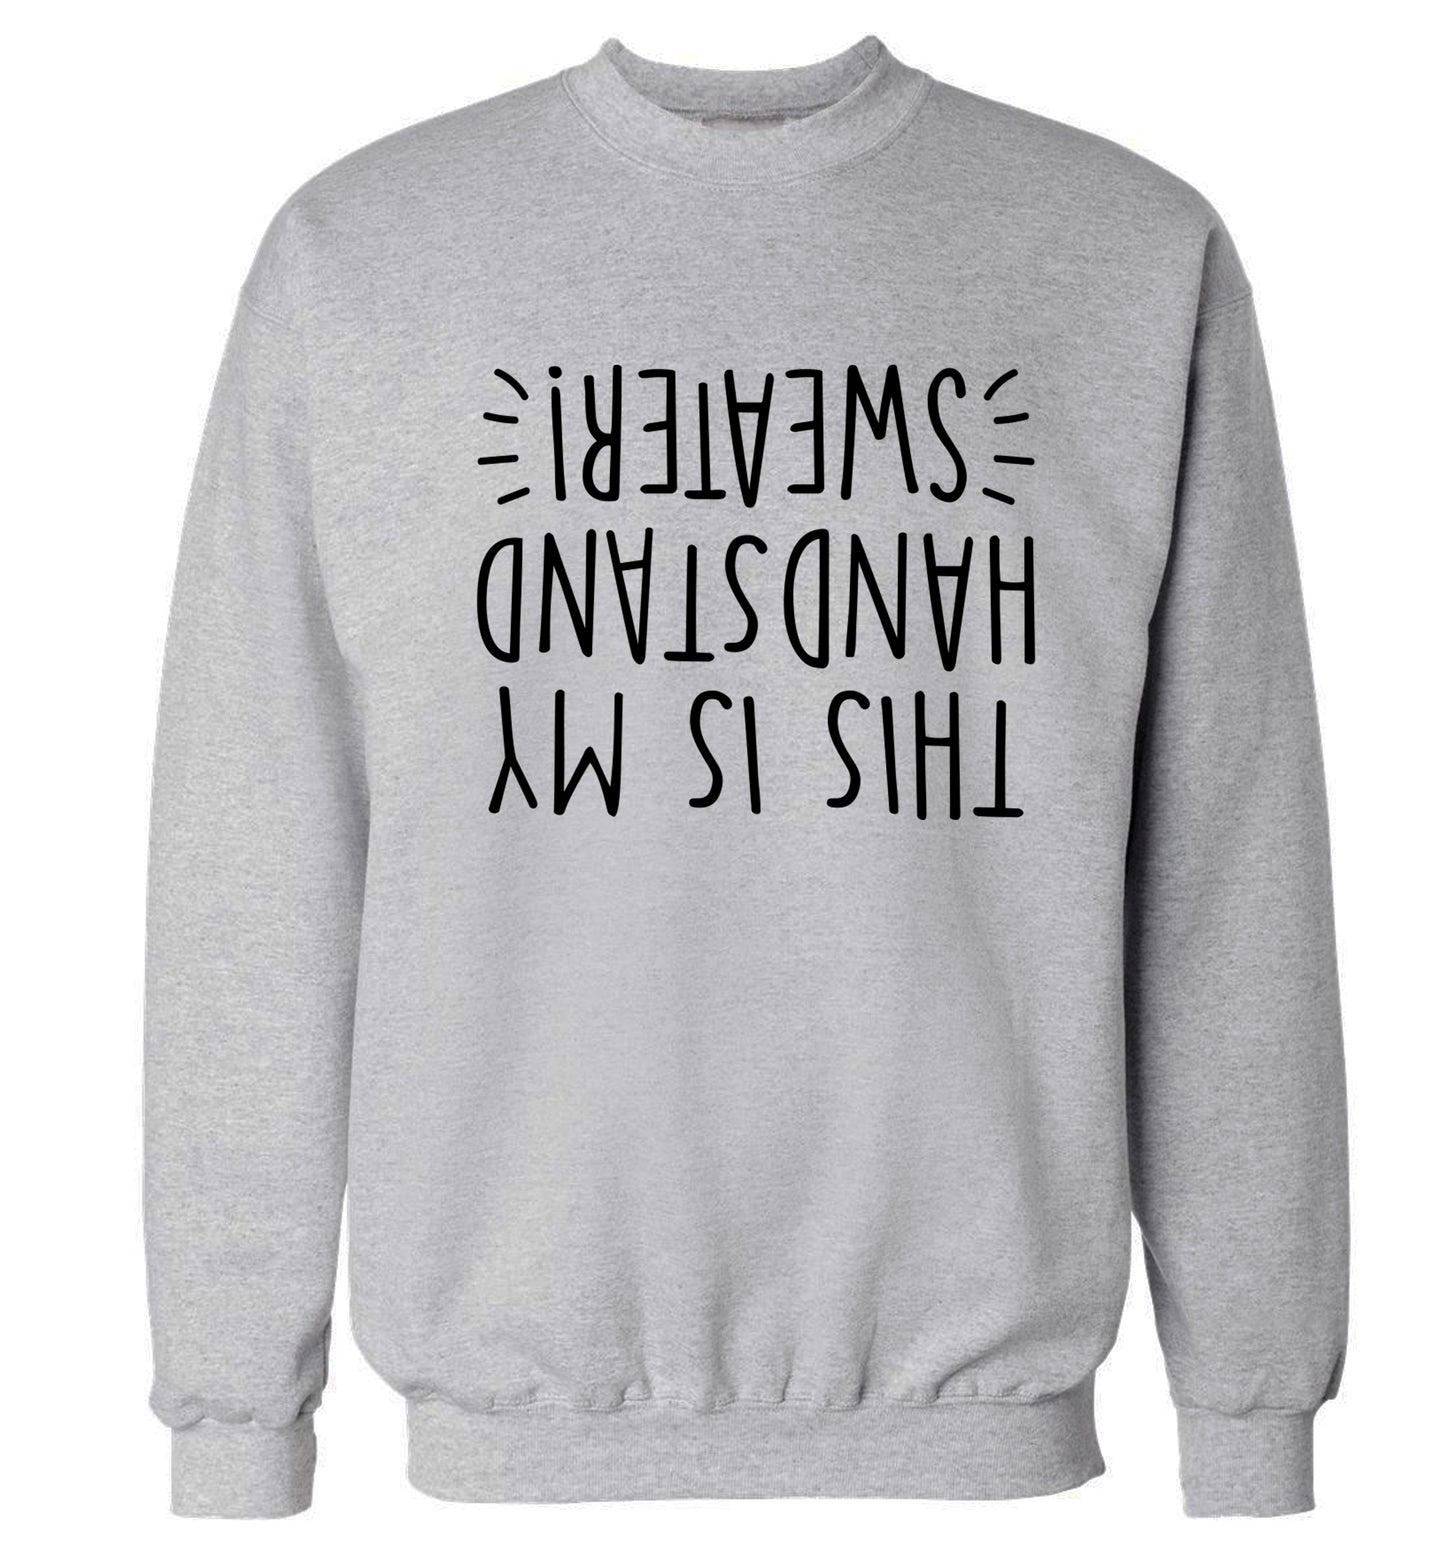 This is my handstand Adult's unisex grey Sweater 2XL